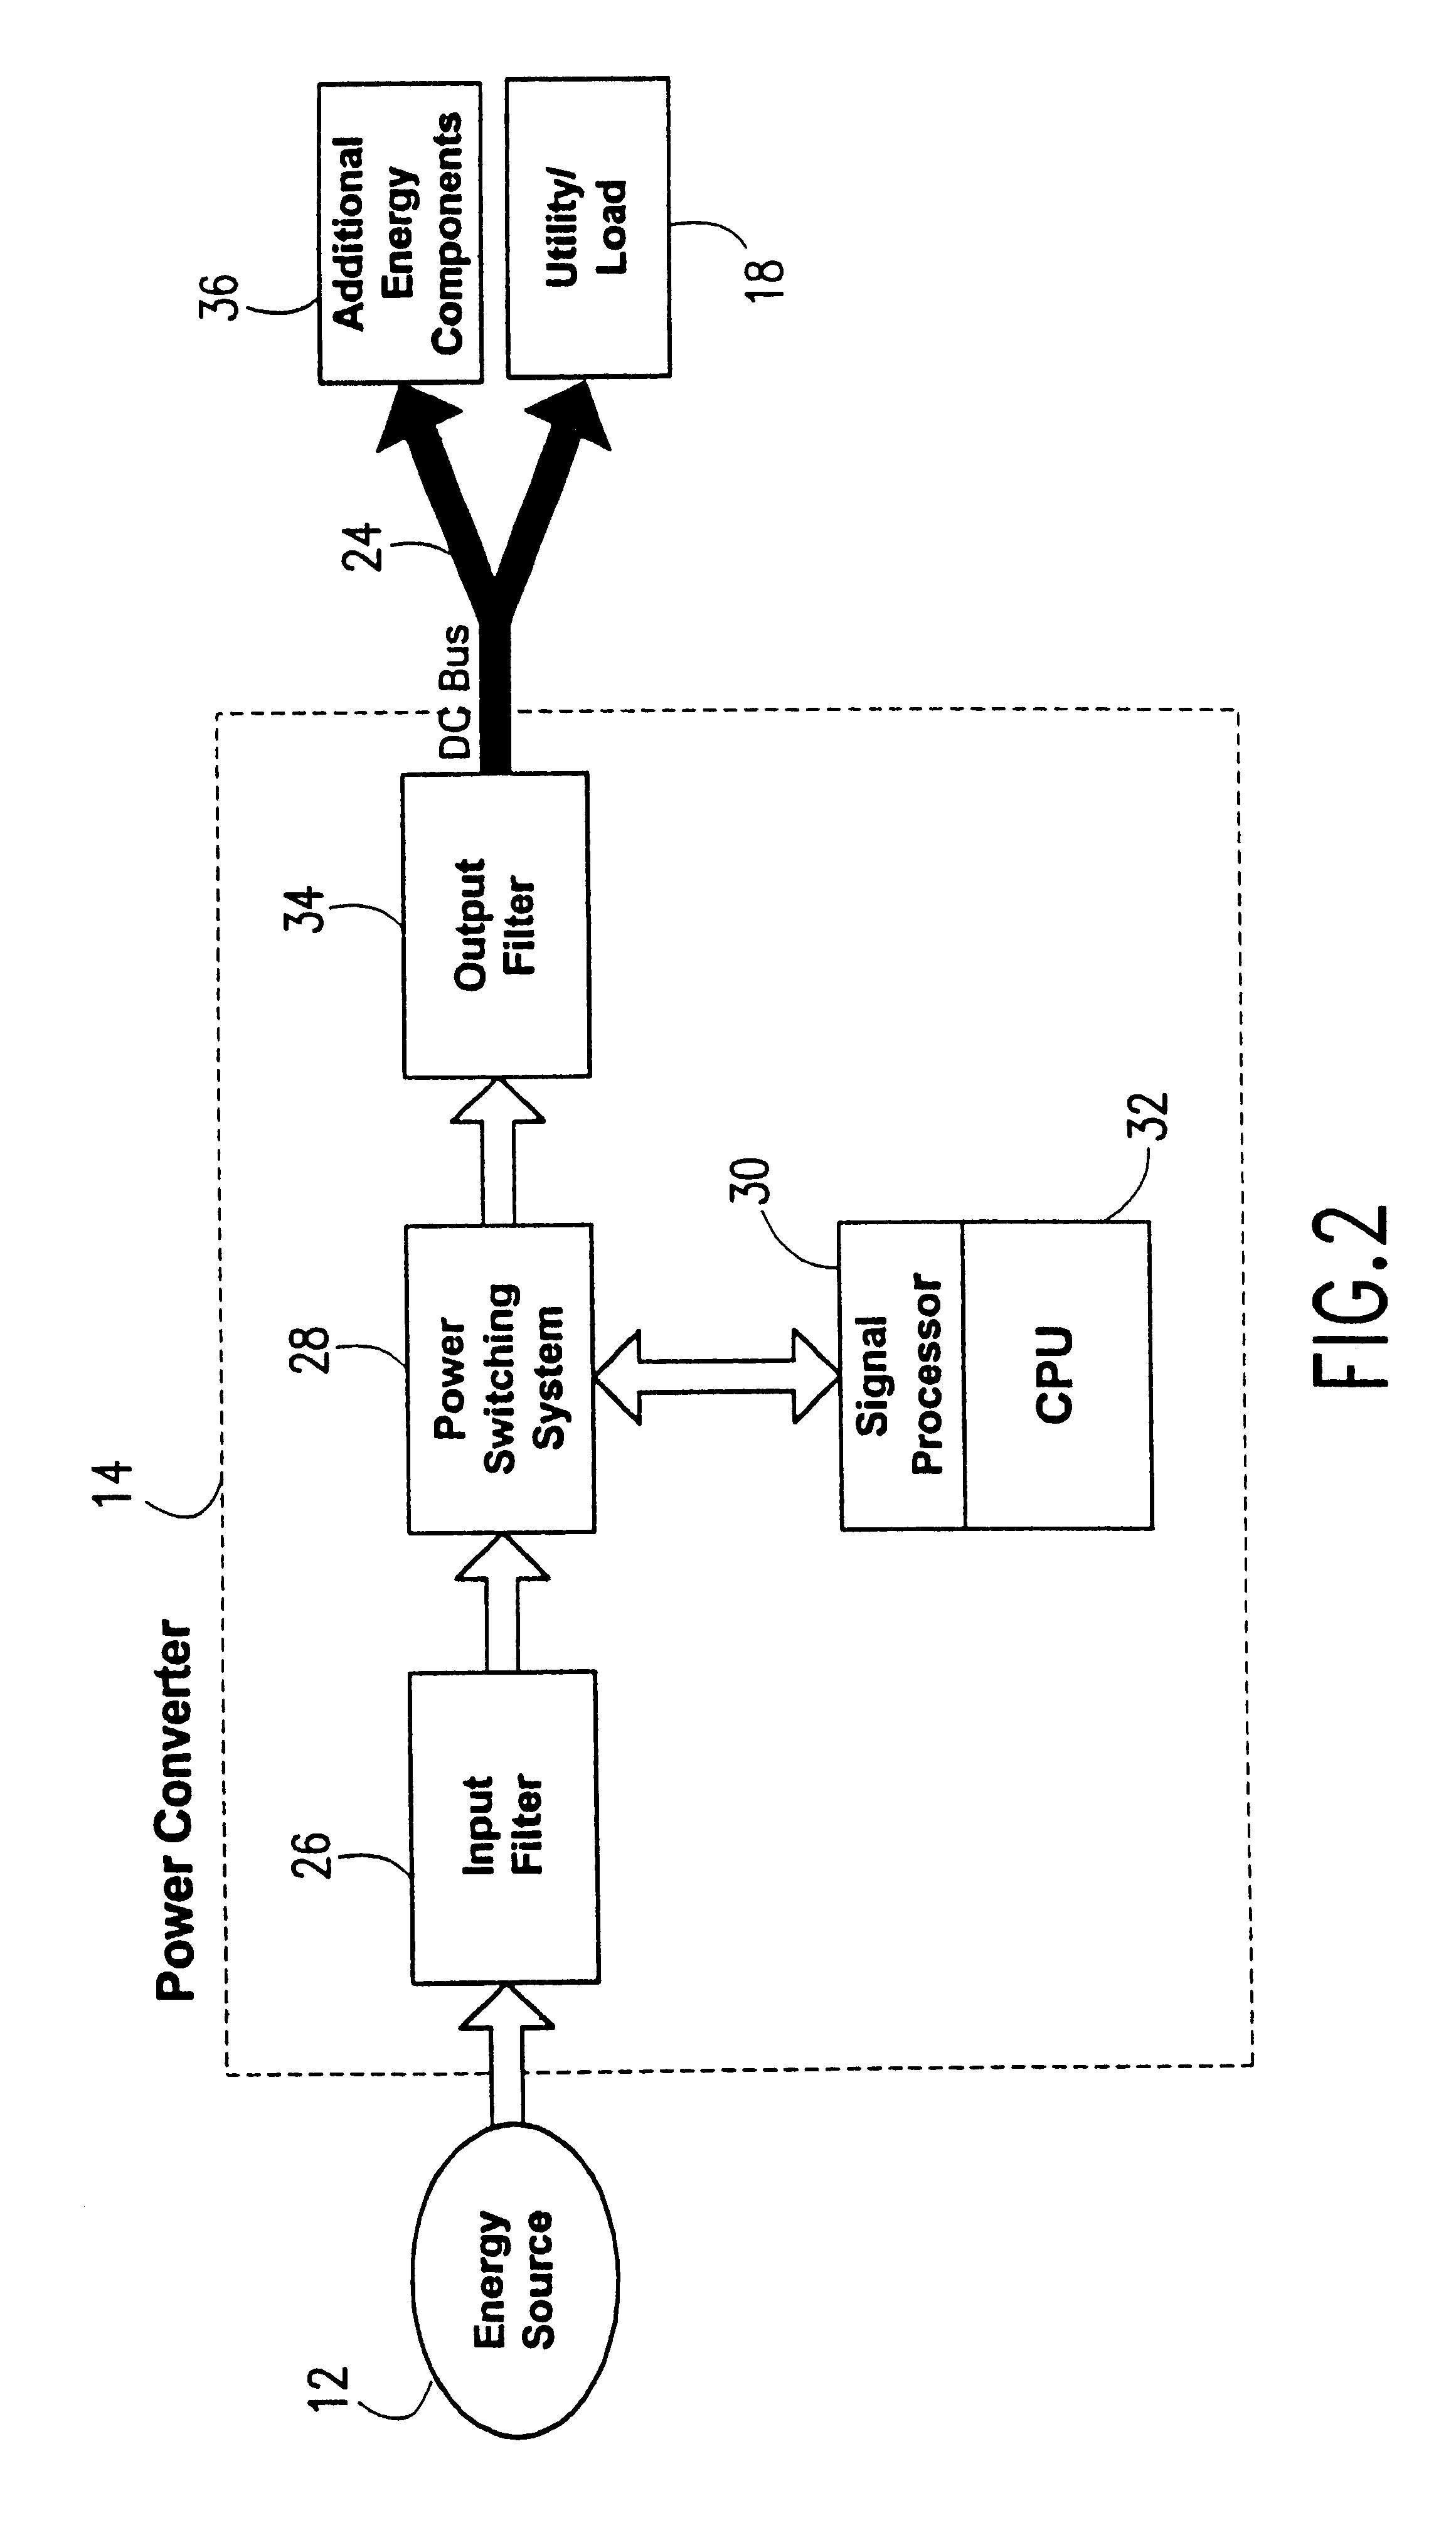 Method and system for control of turbogenerator power and temperature